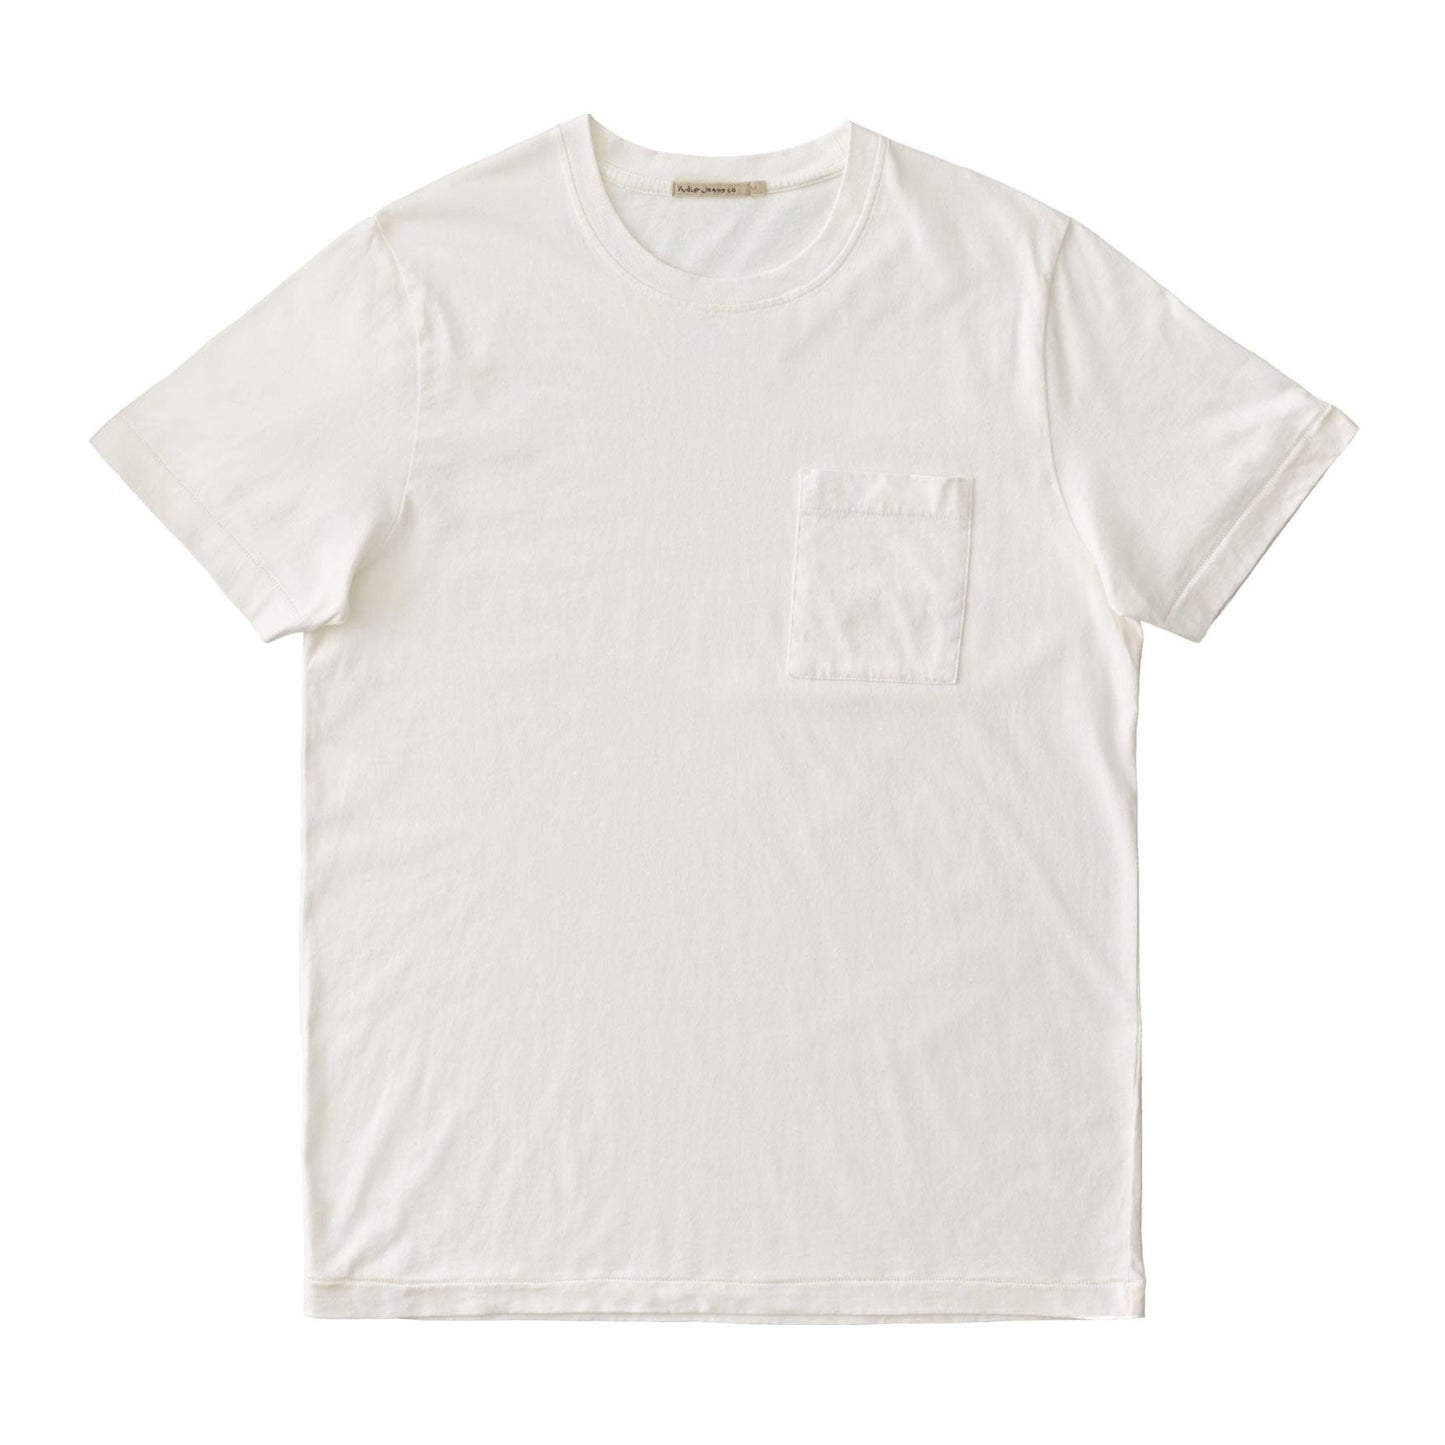 Nudie Jeans Co. Roy One Pocket T-Shirt